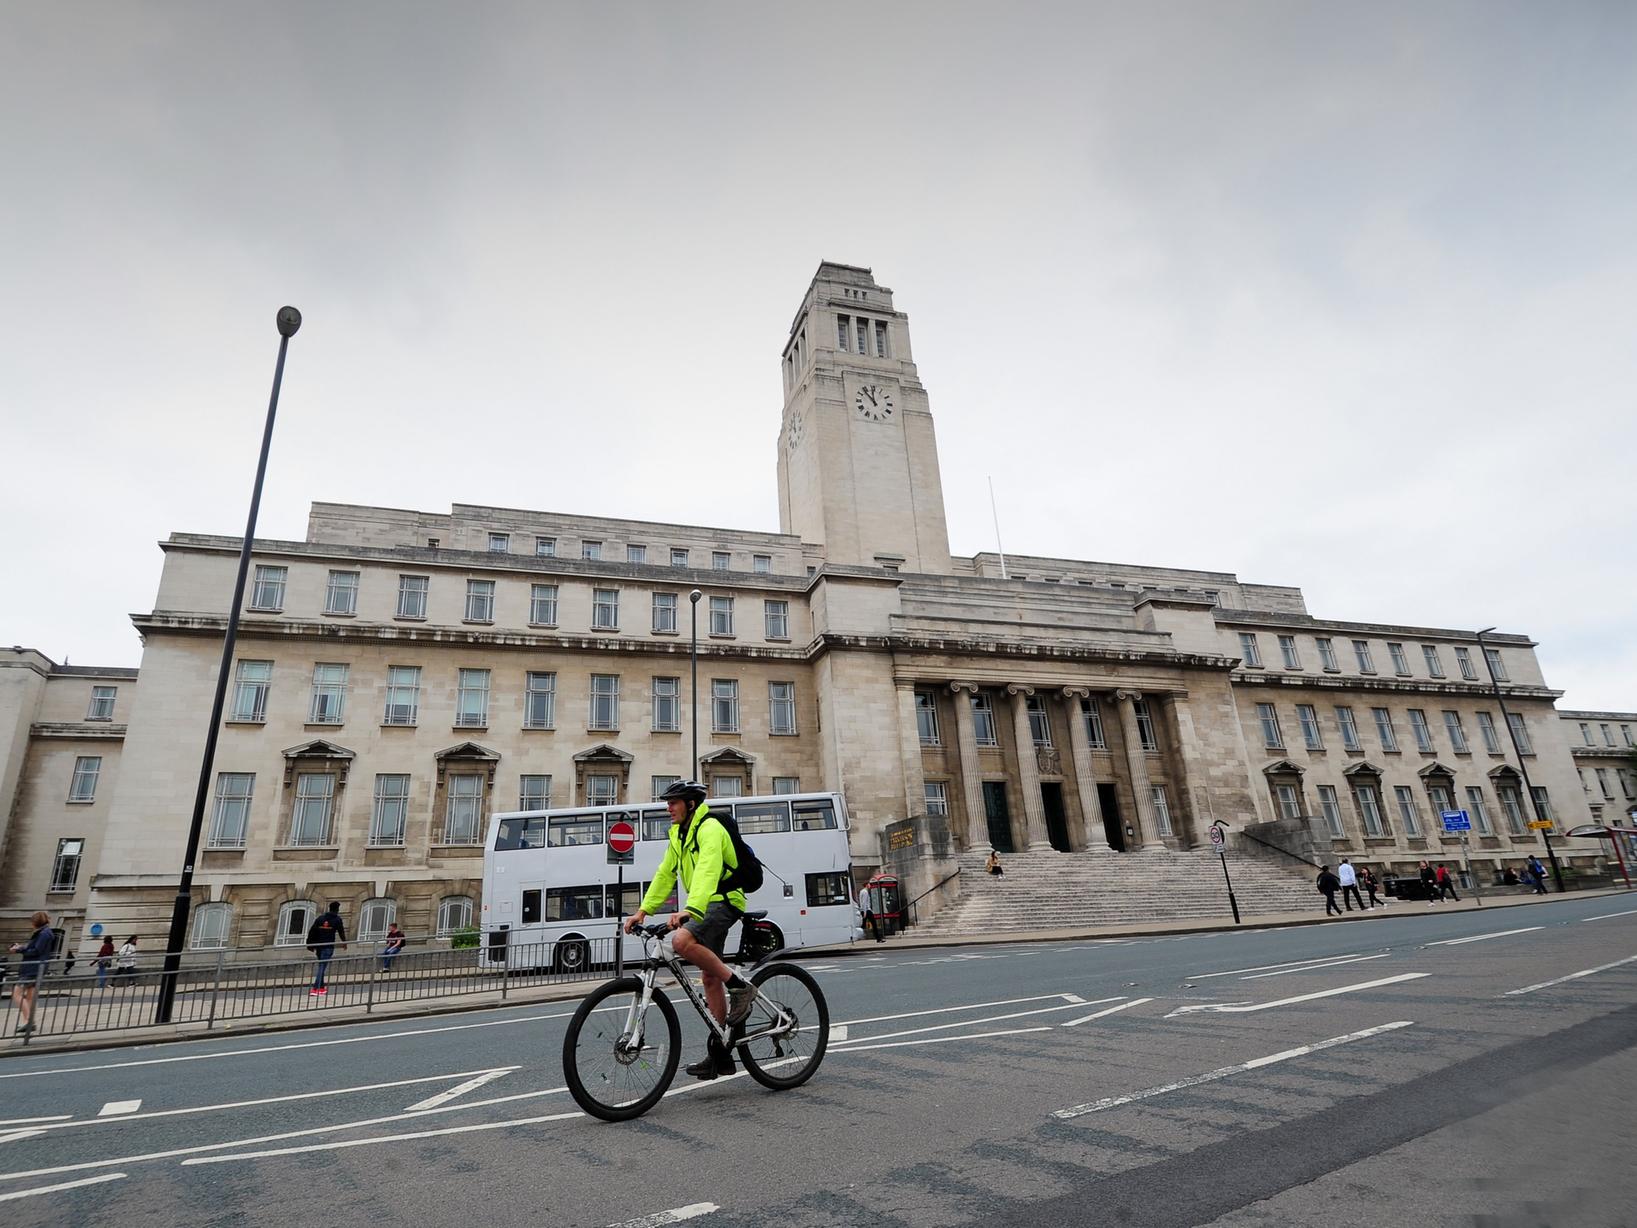 The area around Leeds University campus and Leeds General Infirmary had a high car crime rate with 19 recorded incidents in August.